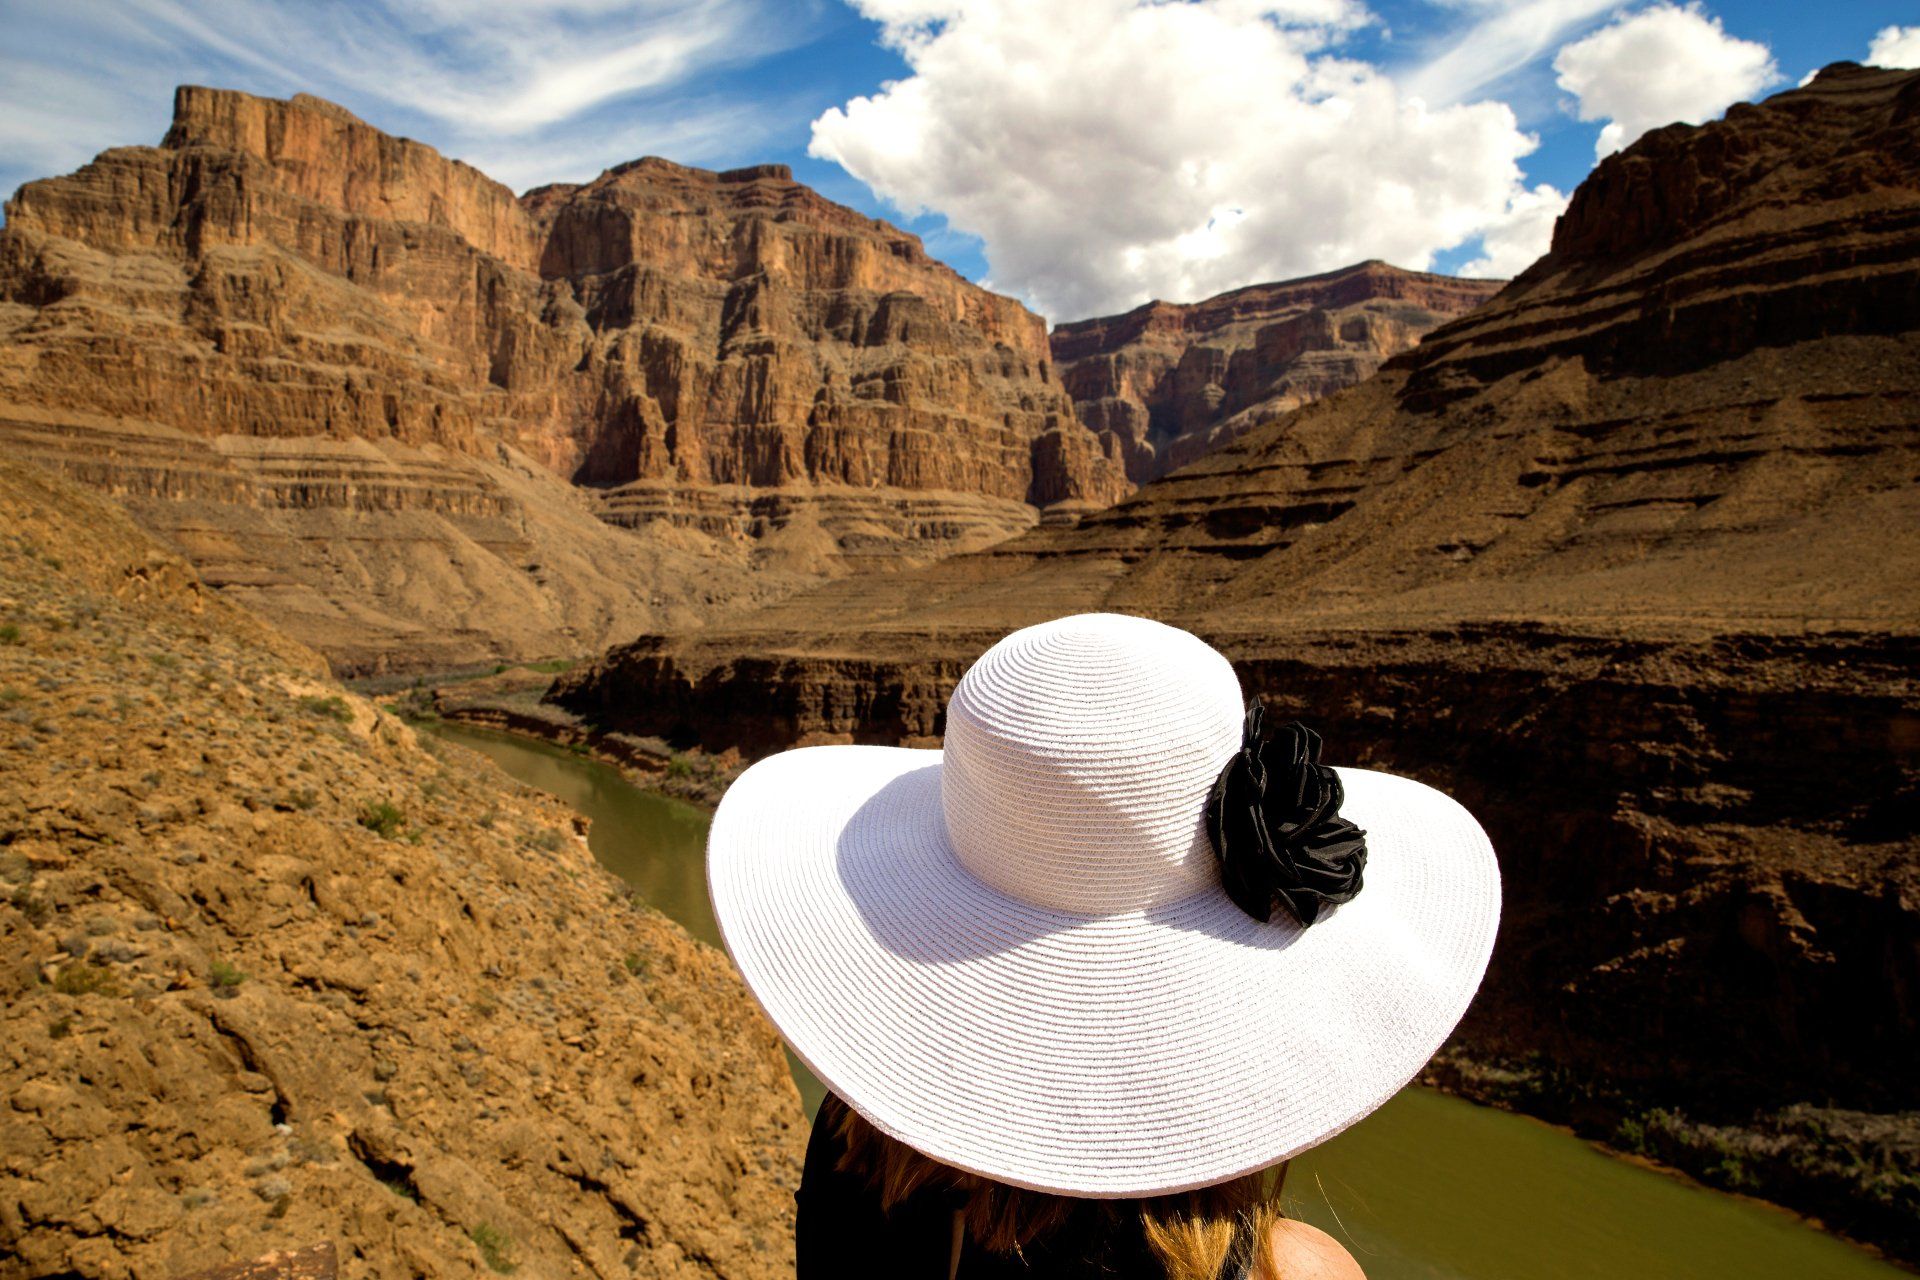 A company employees relaxes with a view across a dramatic western canyon during a company trip